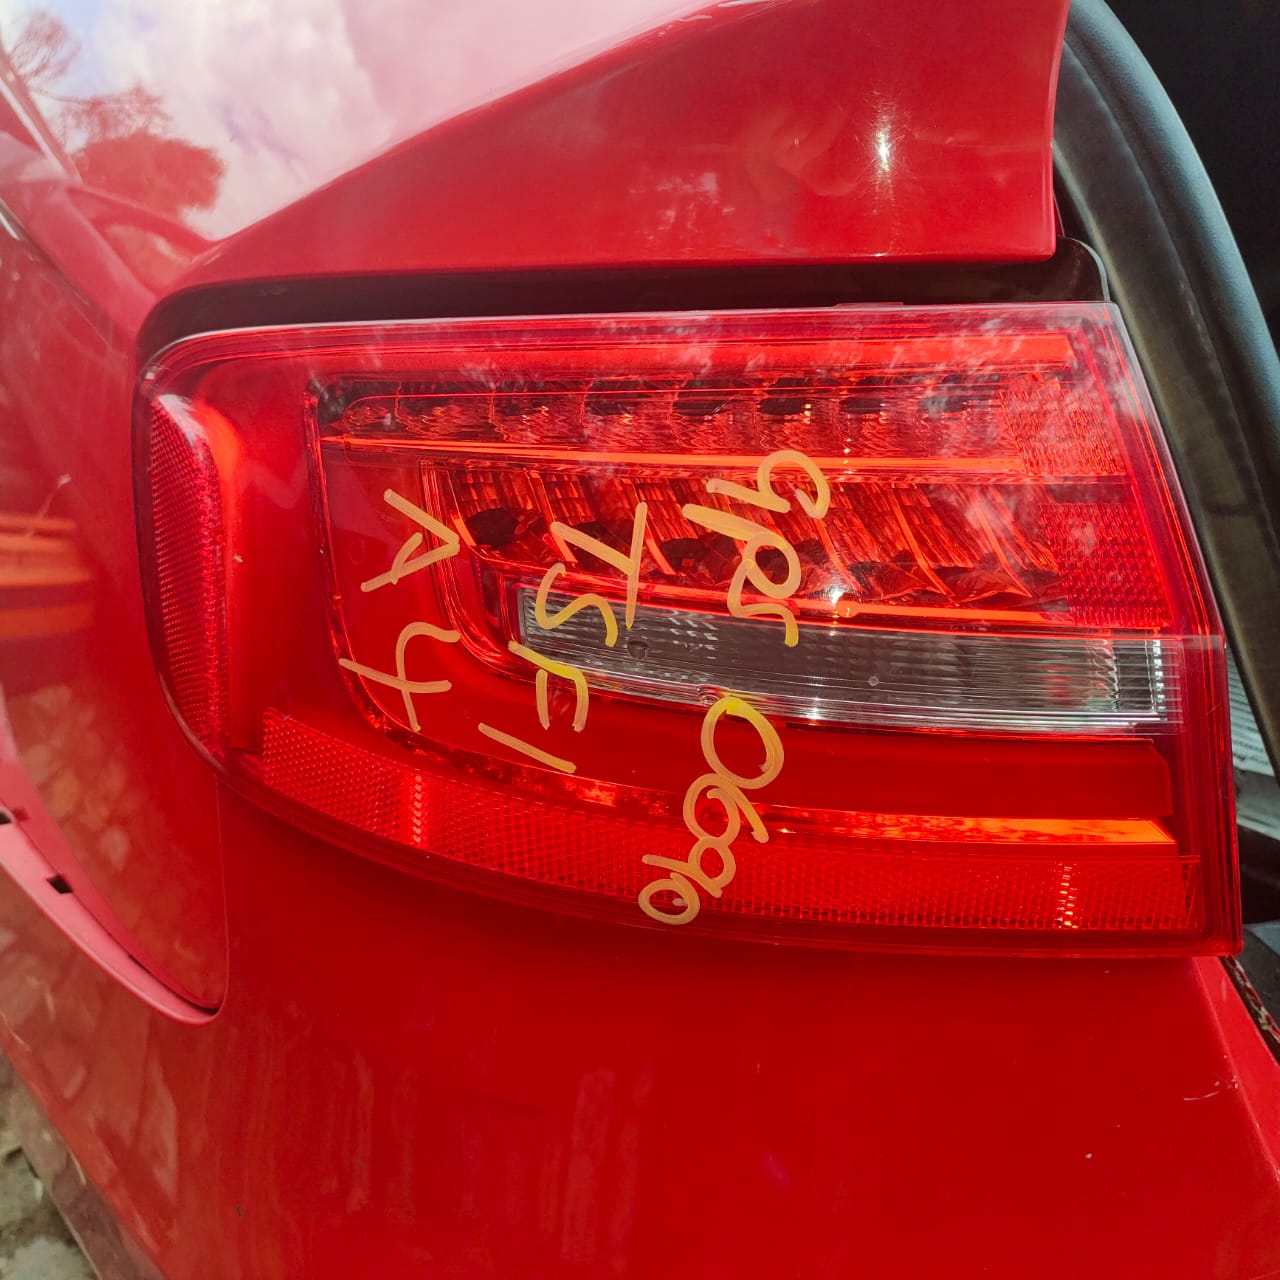 AUDI A4 2014 USED TAIL LIGHTS FOR SALE